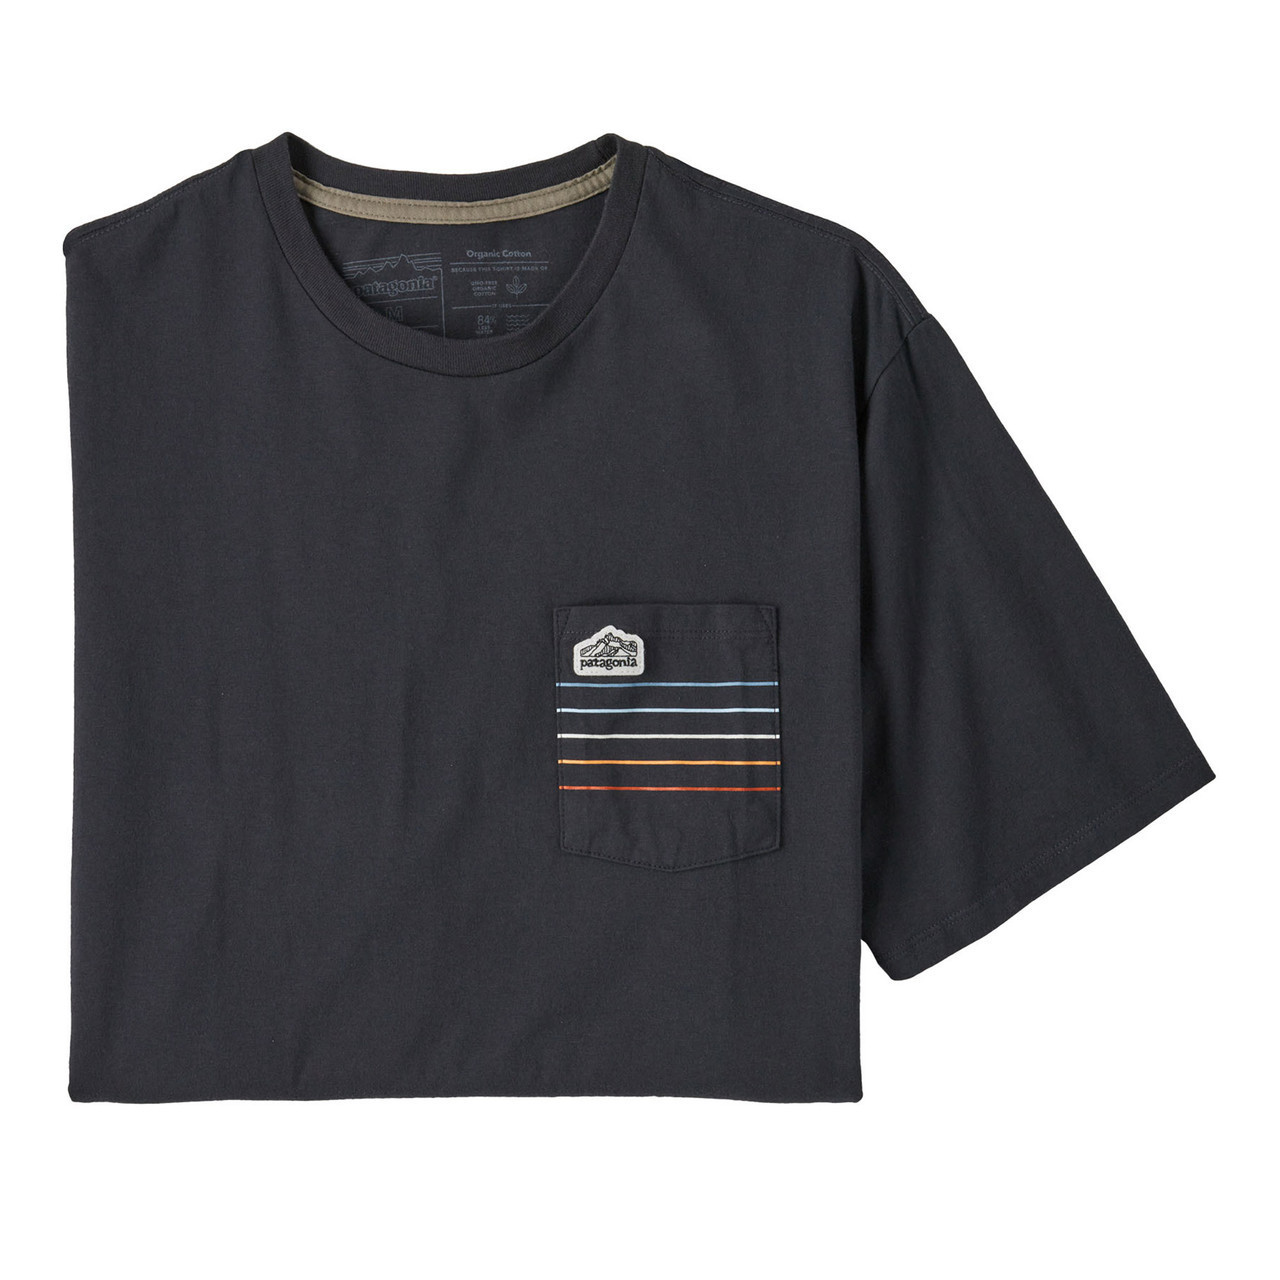 Organic Cotton Clothing: Eco-Friendly Clothing by Patagonia